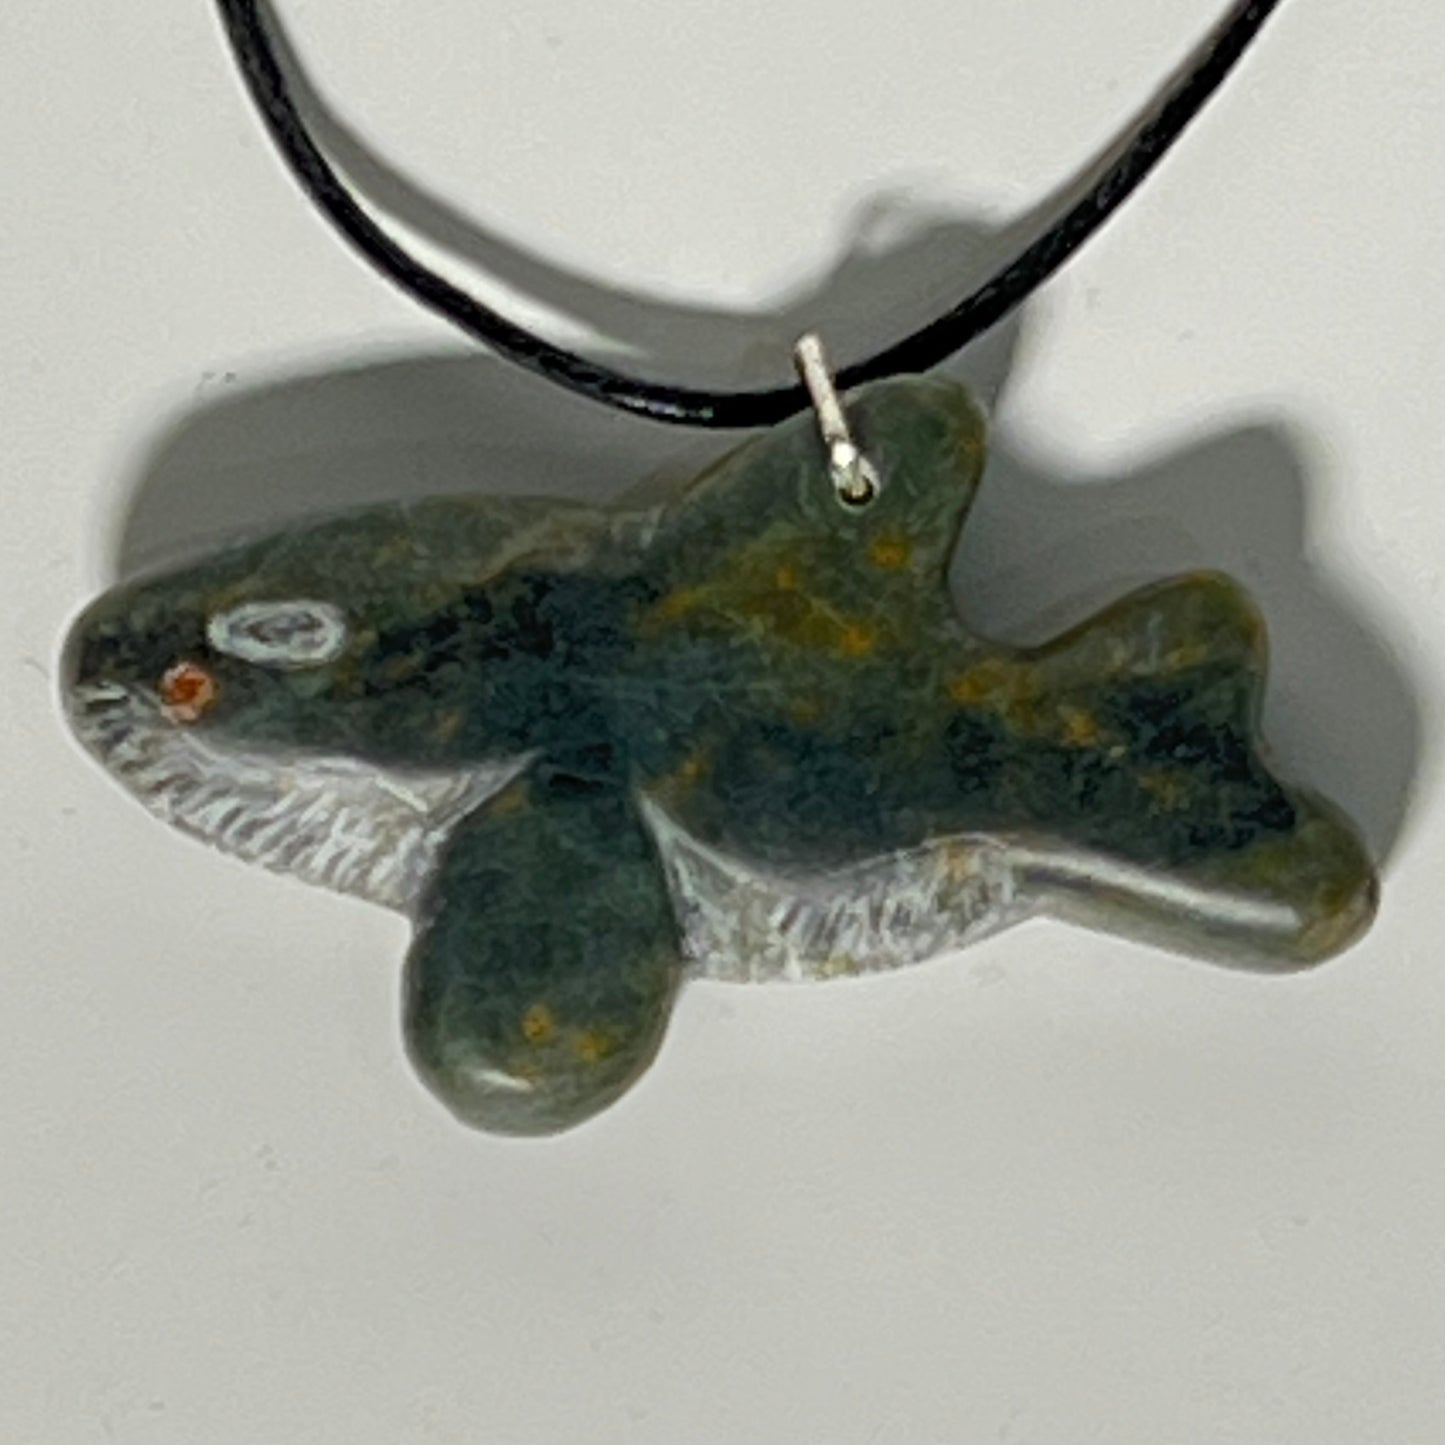 Soapstone carving class orca pendant in Whistler, BC